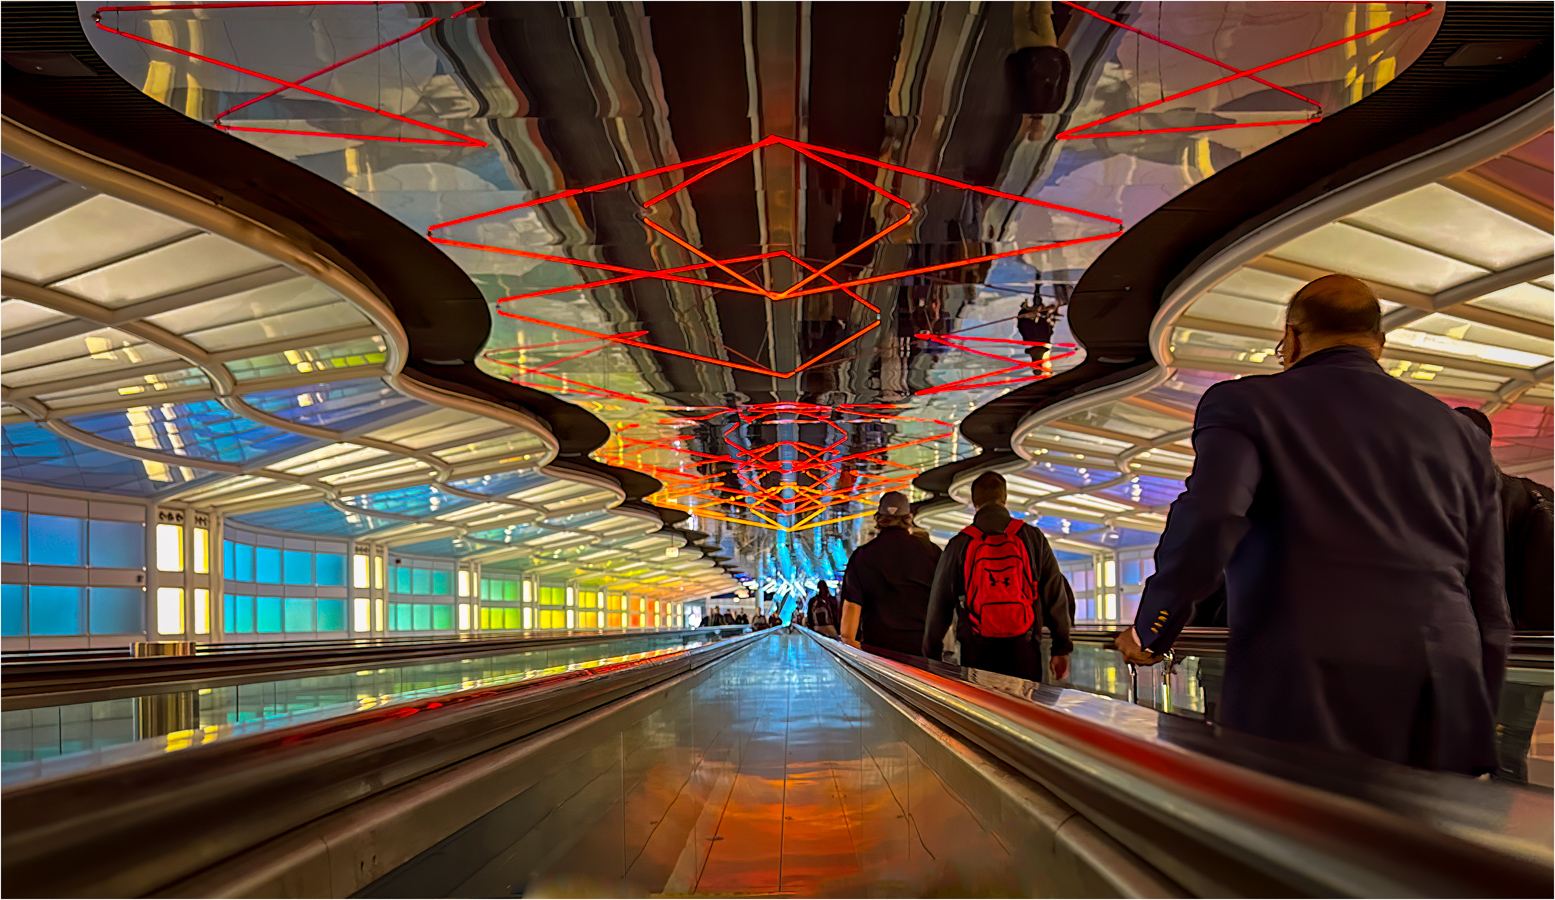 Approaching Terminal 1 by Steven Jungerwirth